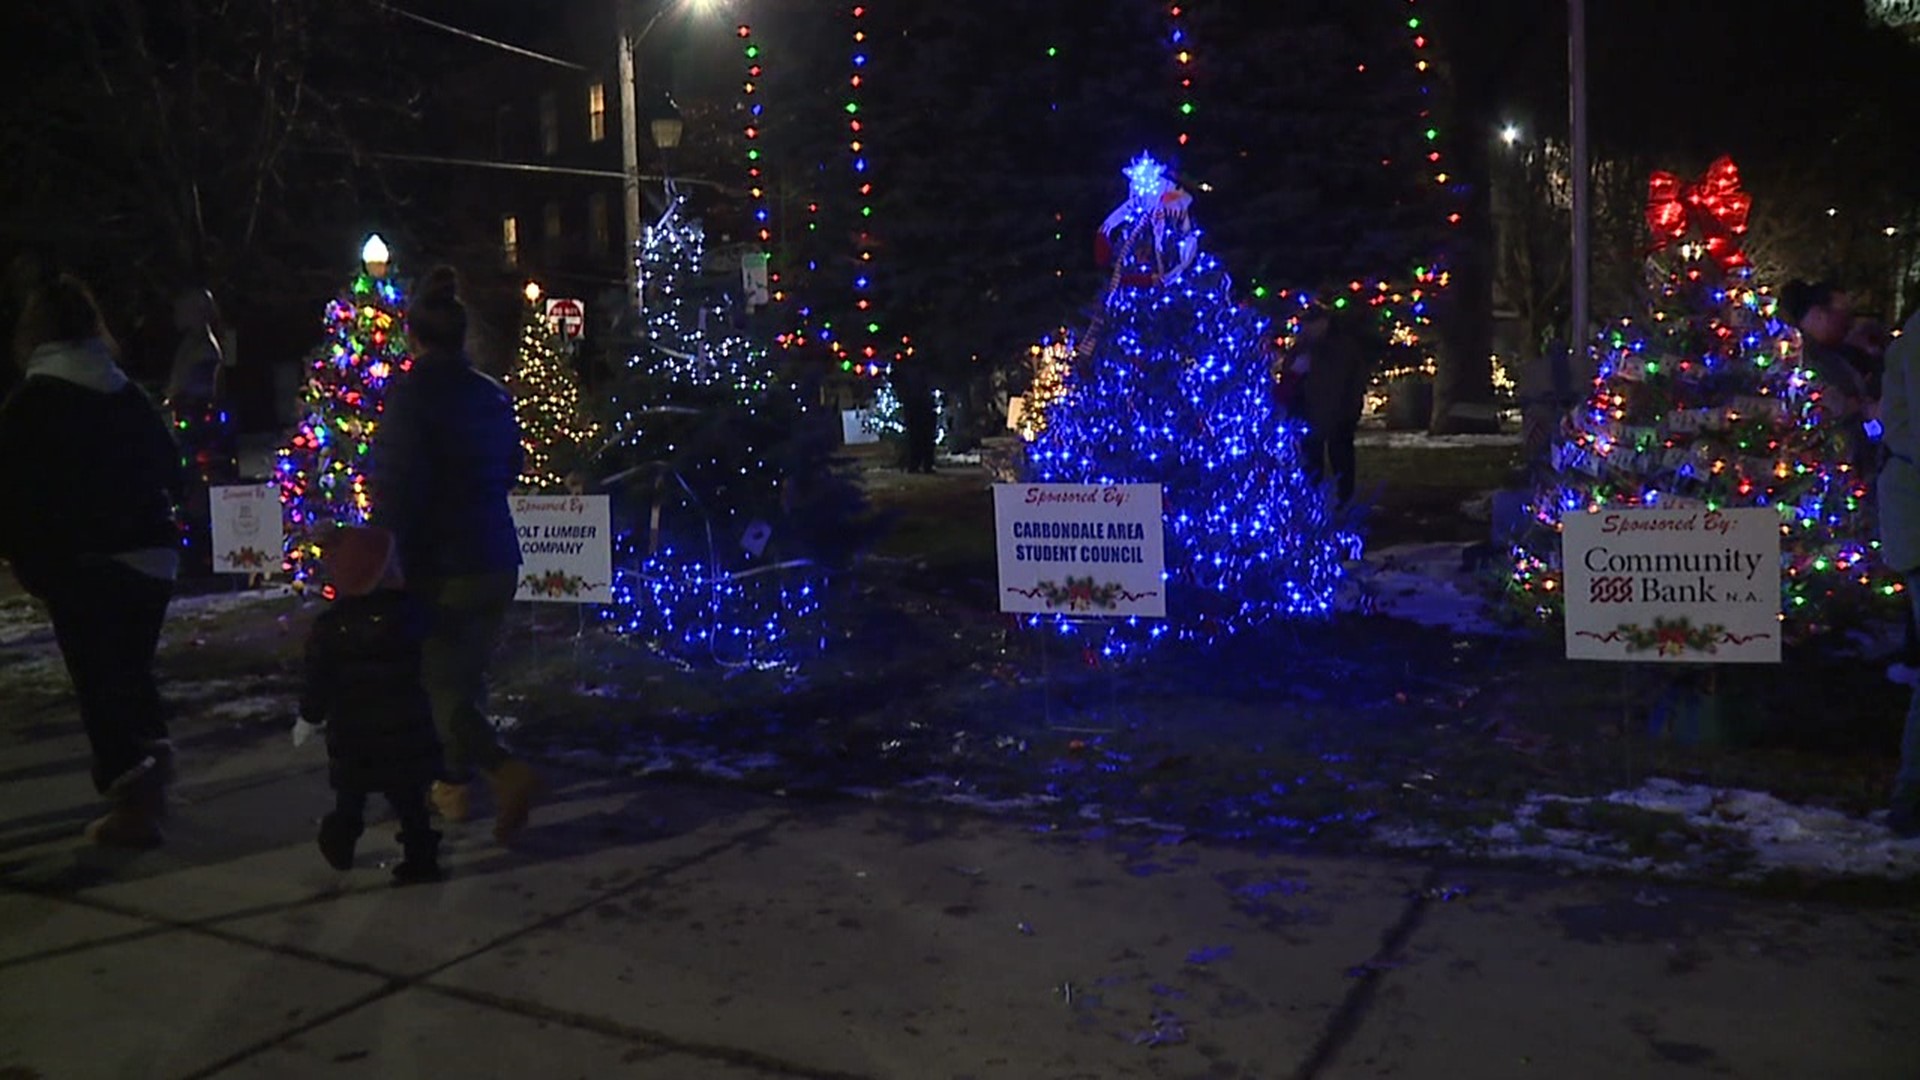 The trail features 17 trees, all of which were decorated by local non-profits and businesses.